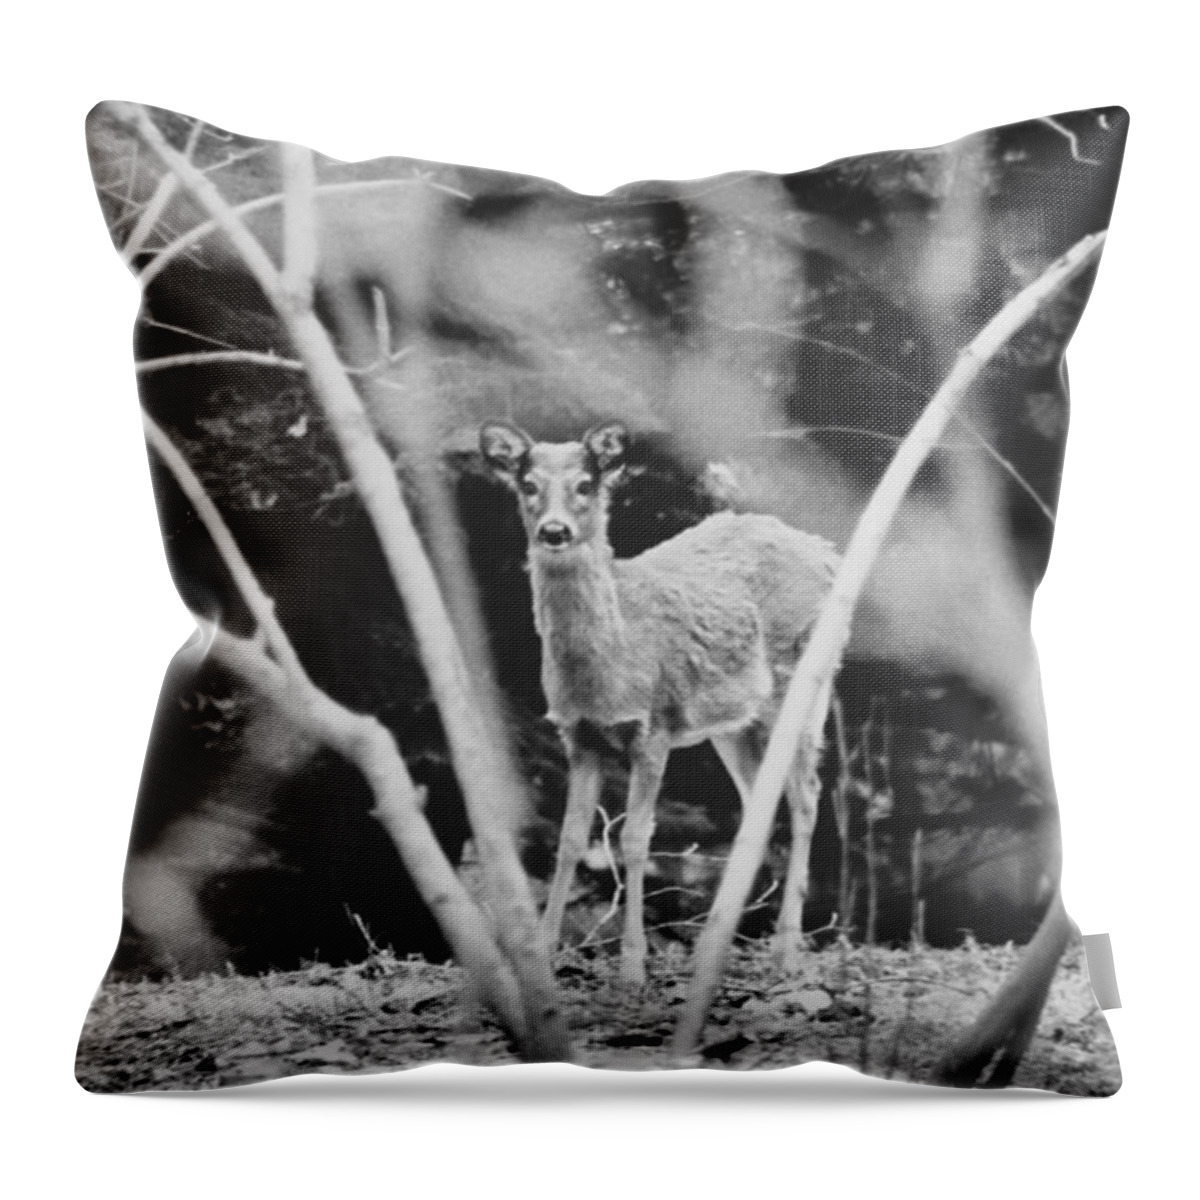 Black And White Throw Pillow featuring the photograph Oh Deer by Carrie Ann Grippo-Pike